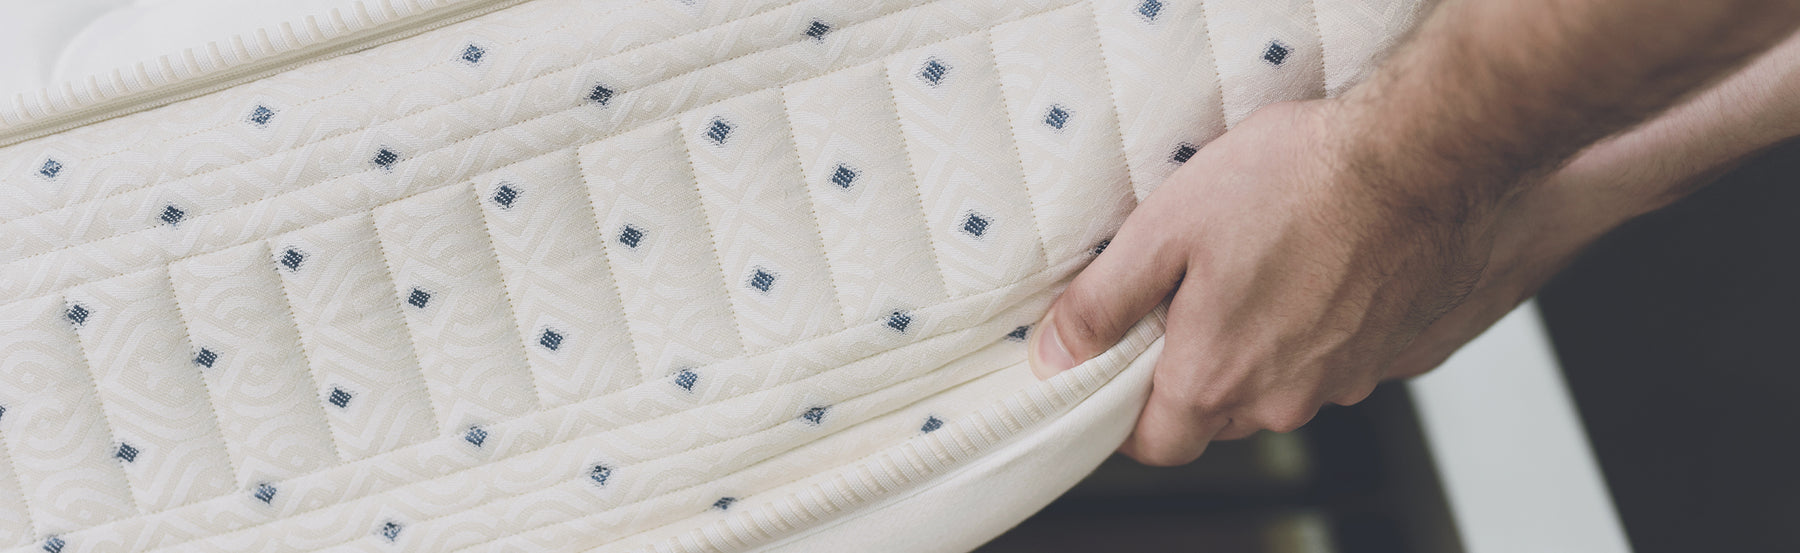 How to Make an Old Mattress More Comfortable